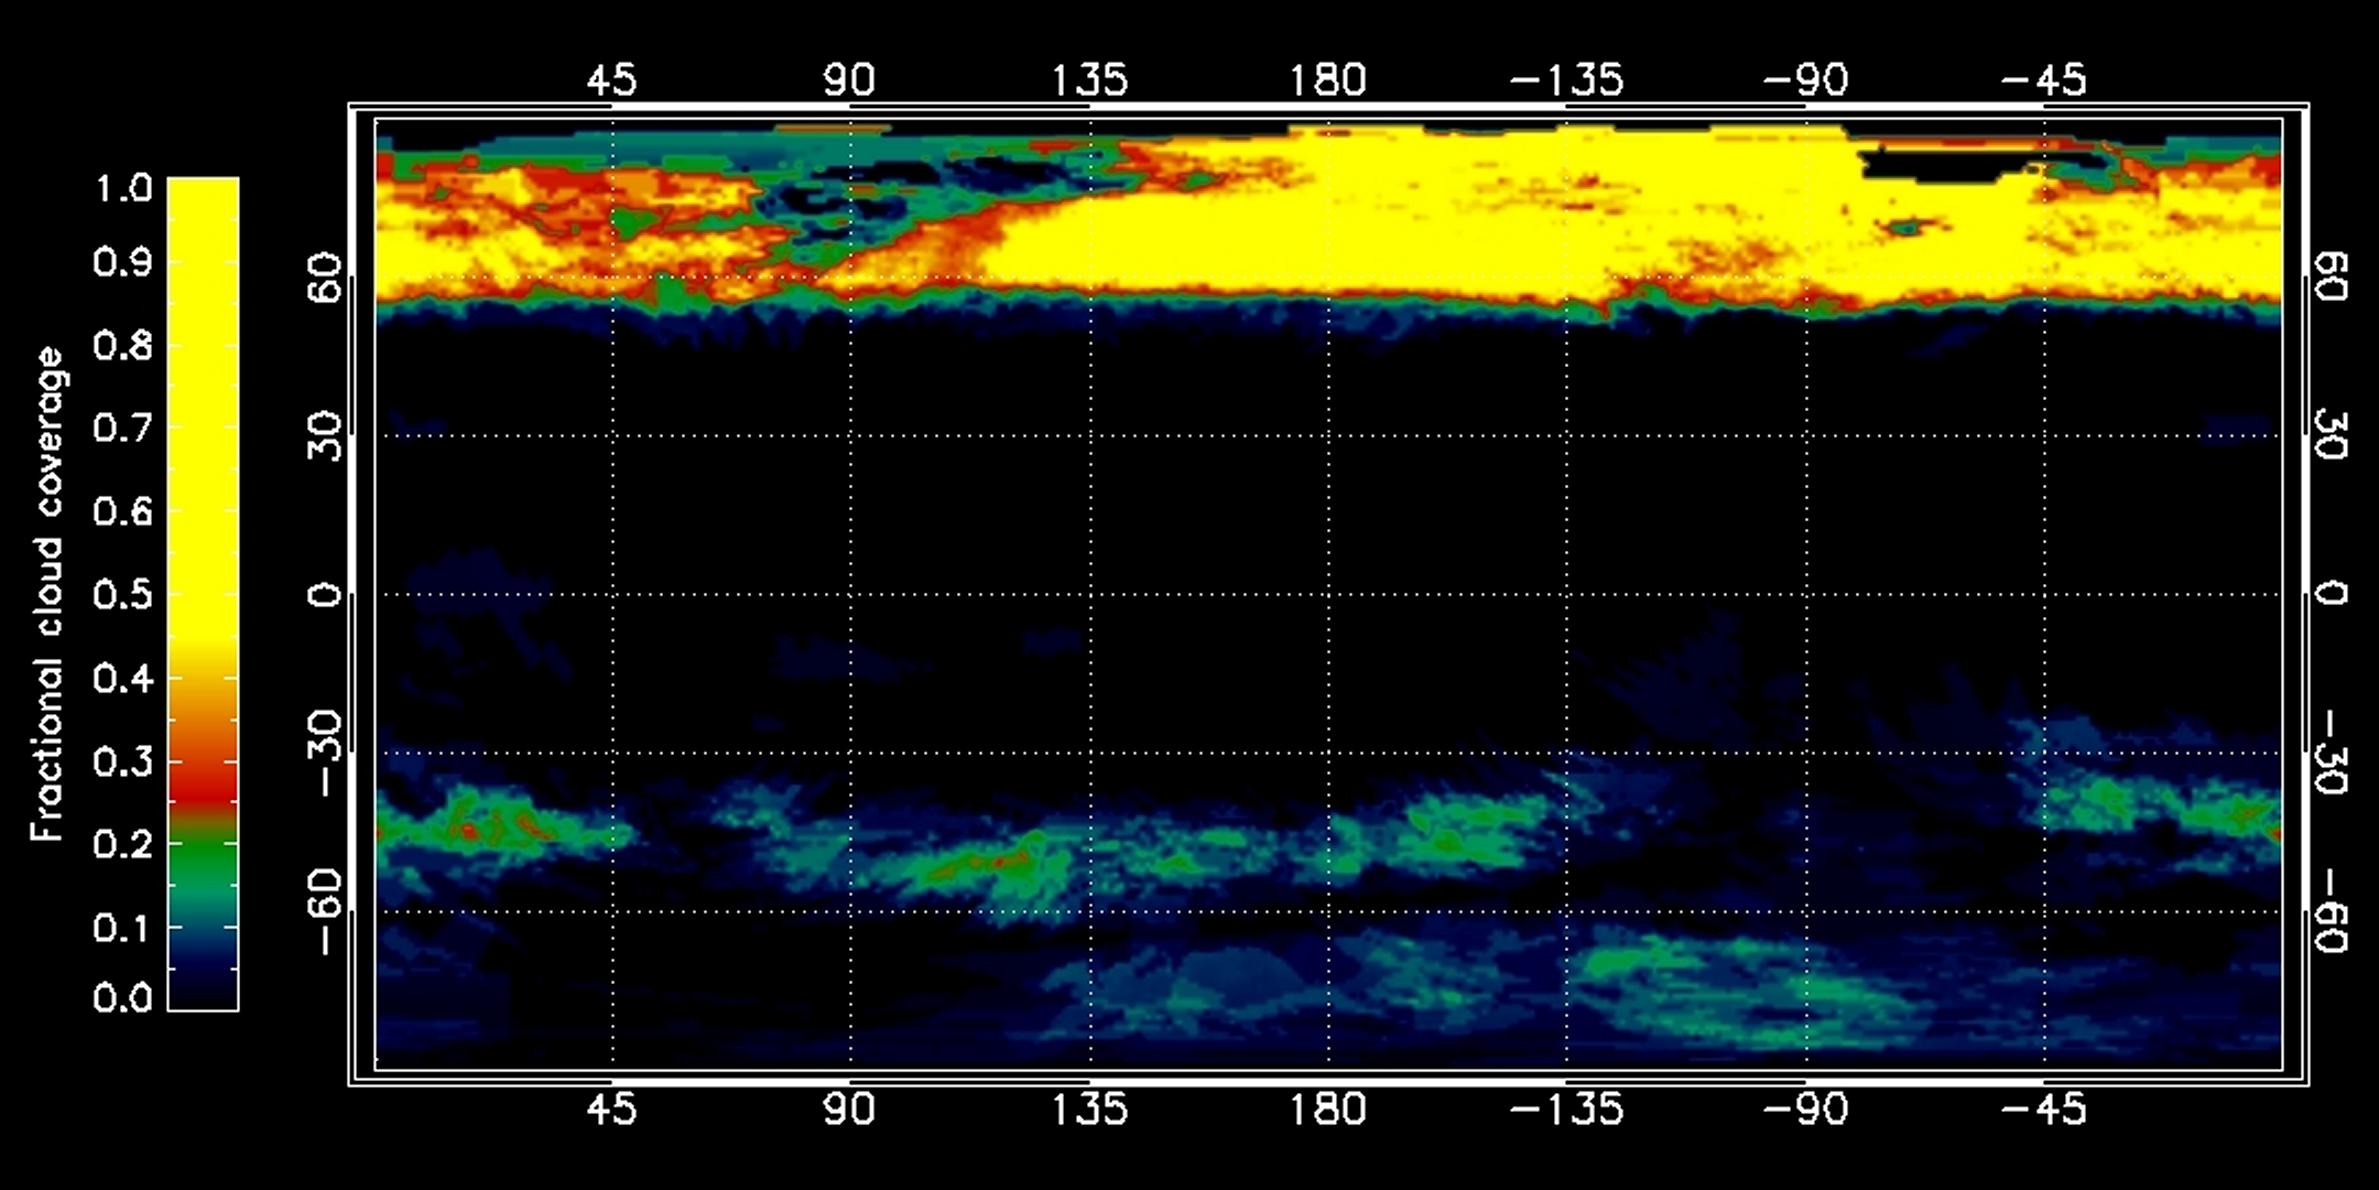 Graphic showing percentage of cloud coverage across the surface of Titan. 